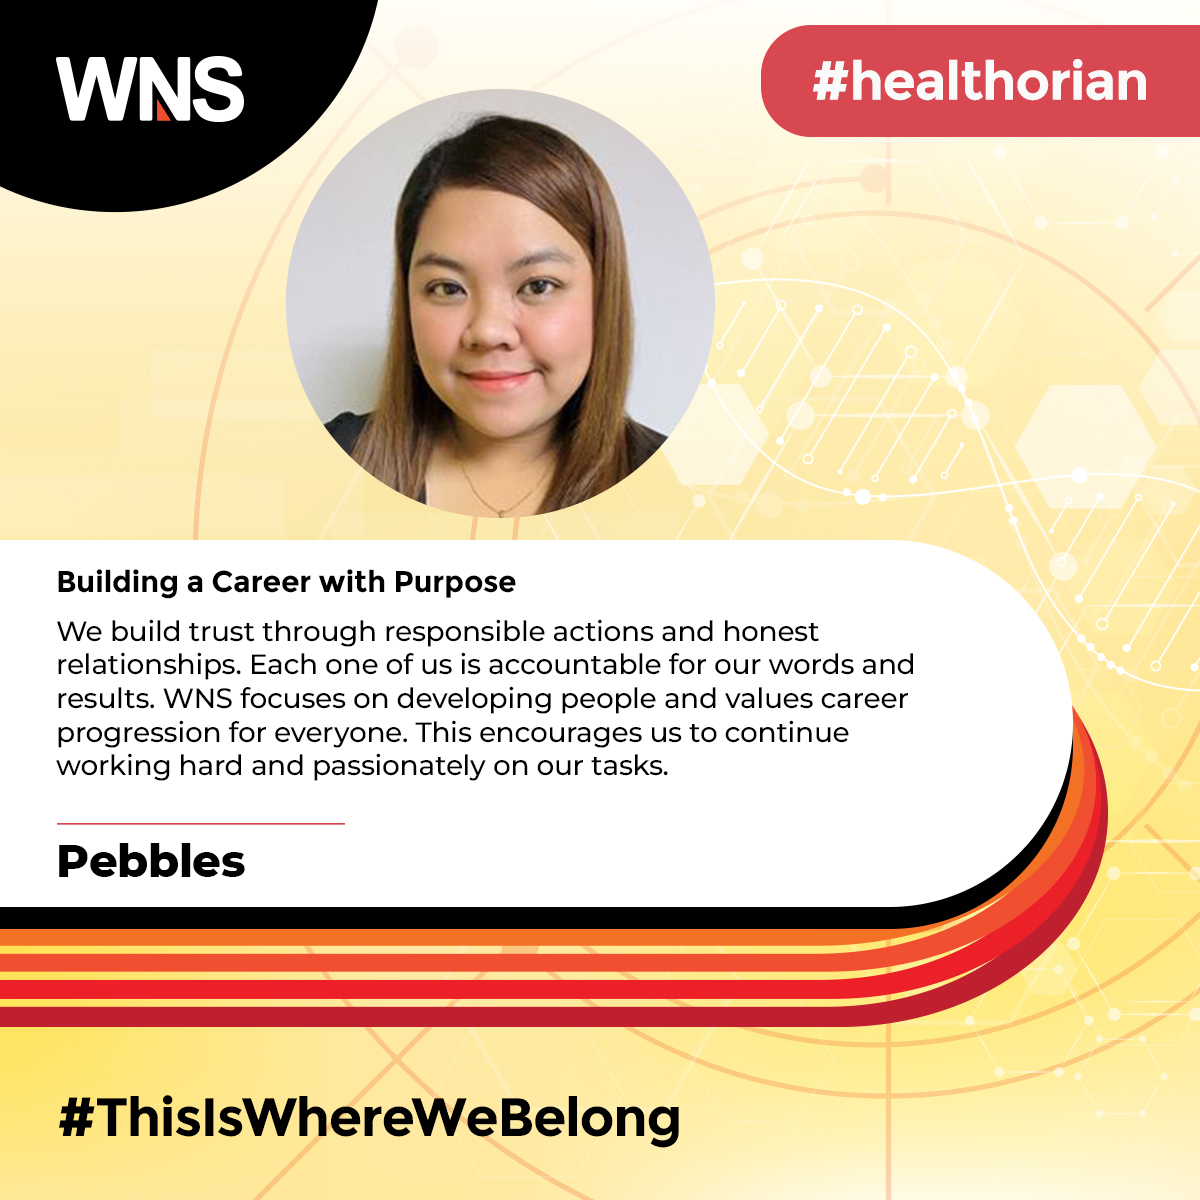 Read the full story of #WNSer Pebbles here. #healthorian #ThisIsWhereWeBelong